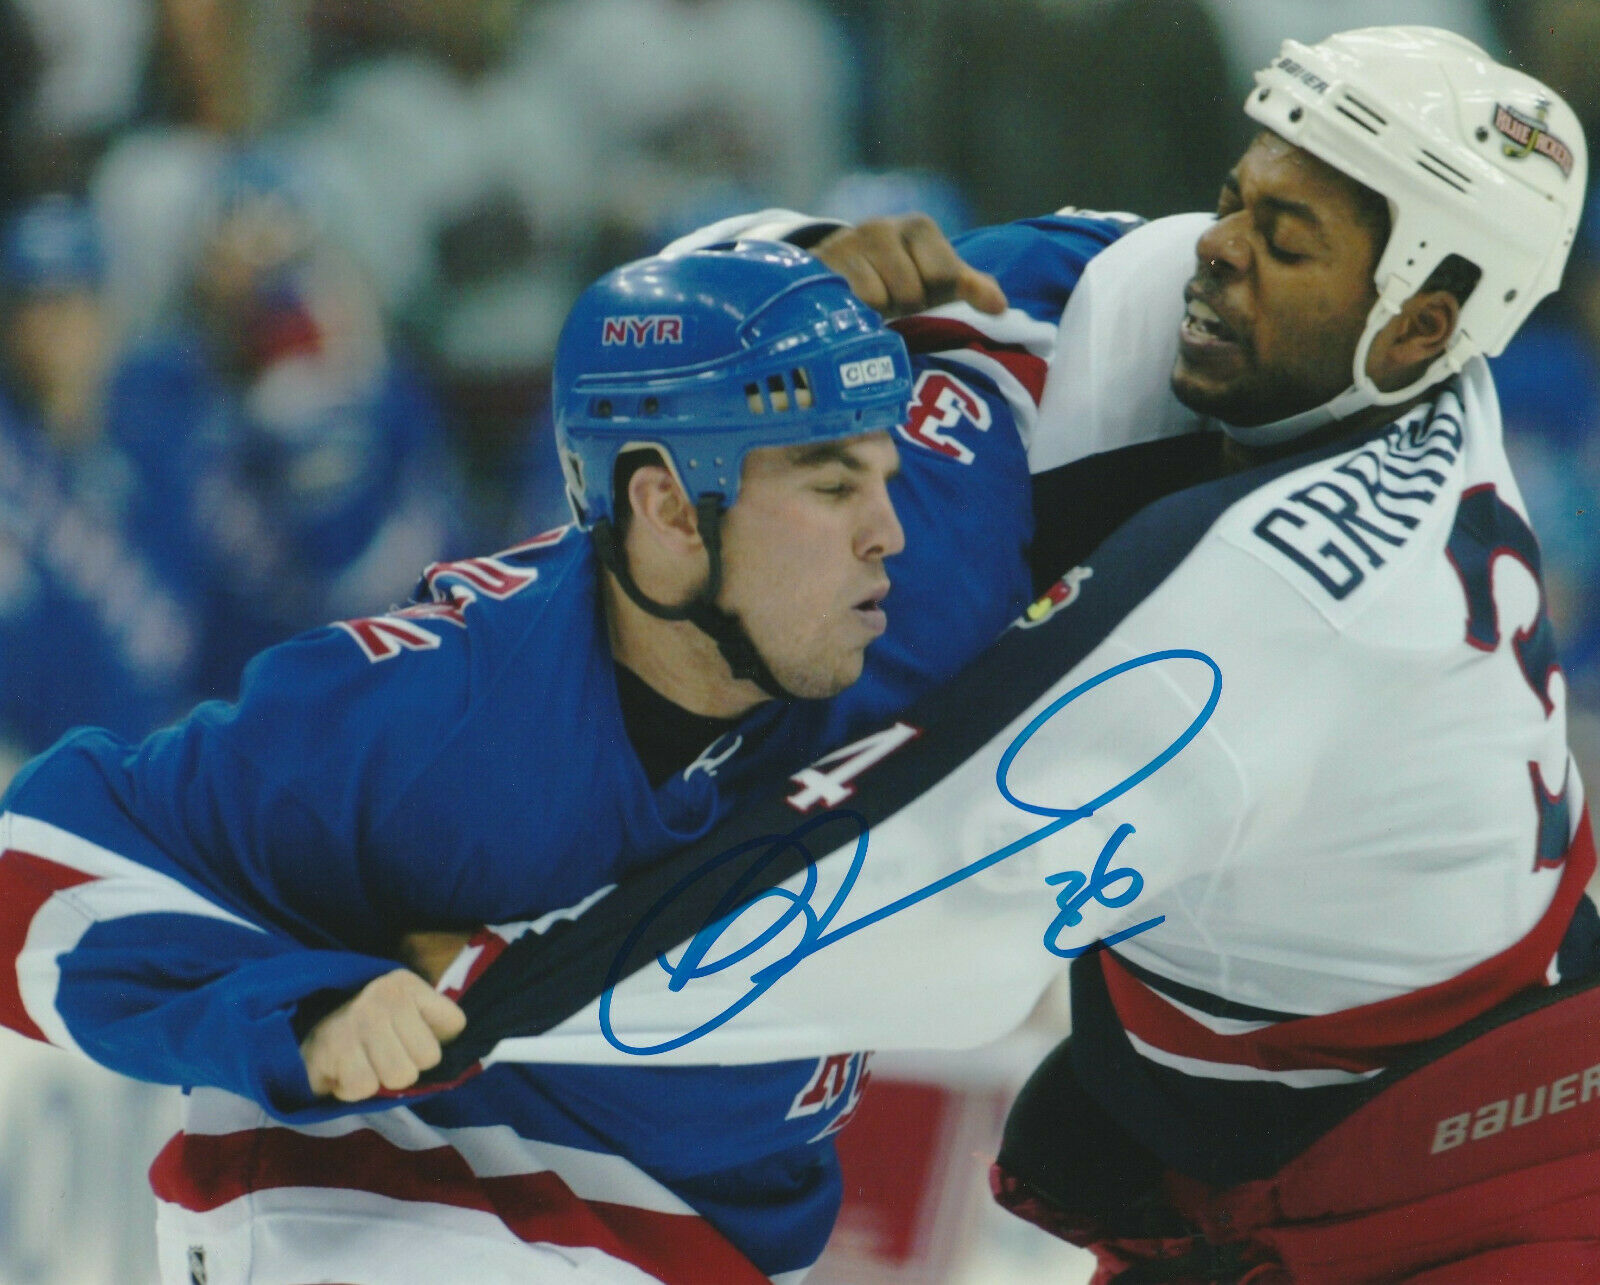 MATTHEW BARNABY SIGNED NEW YORK NY RANGERS FIGHT 8x10 Photo Poster painting #1 Autograph